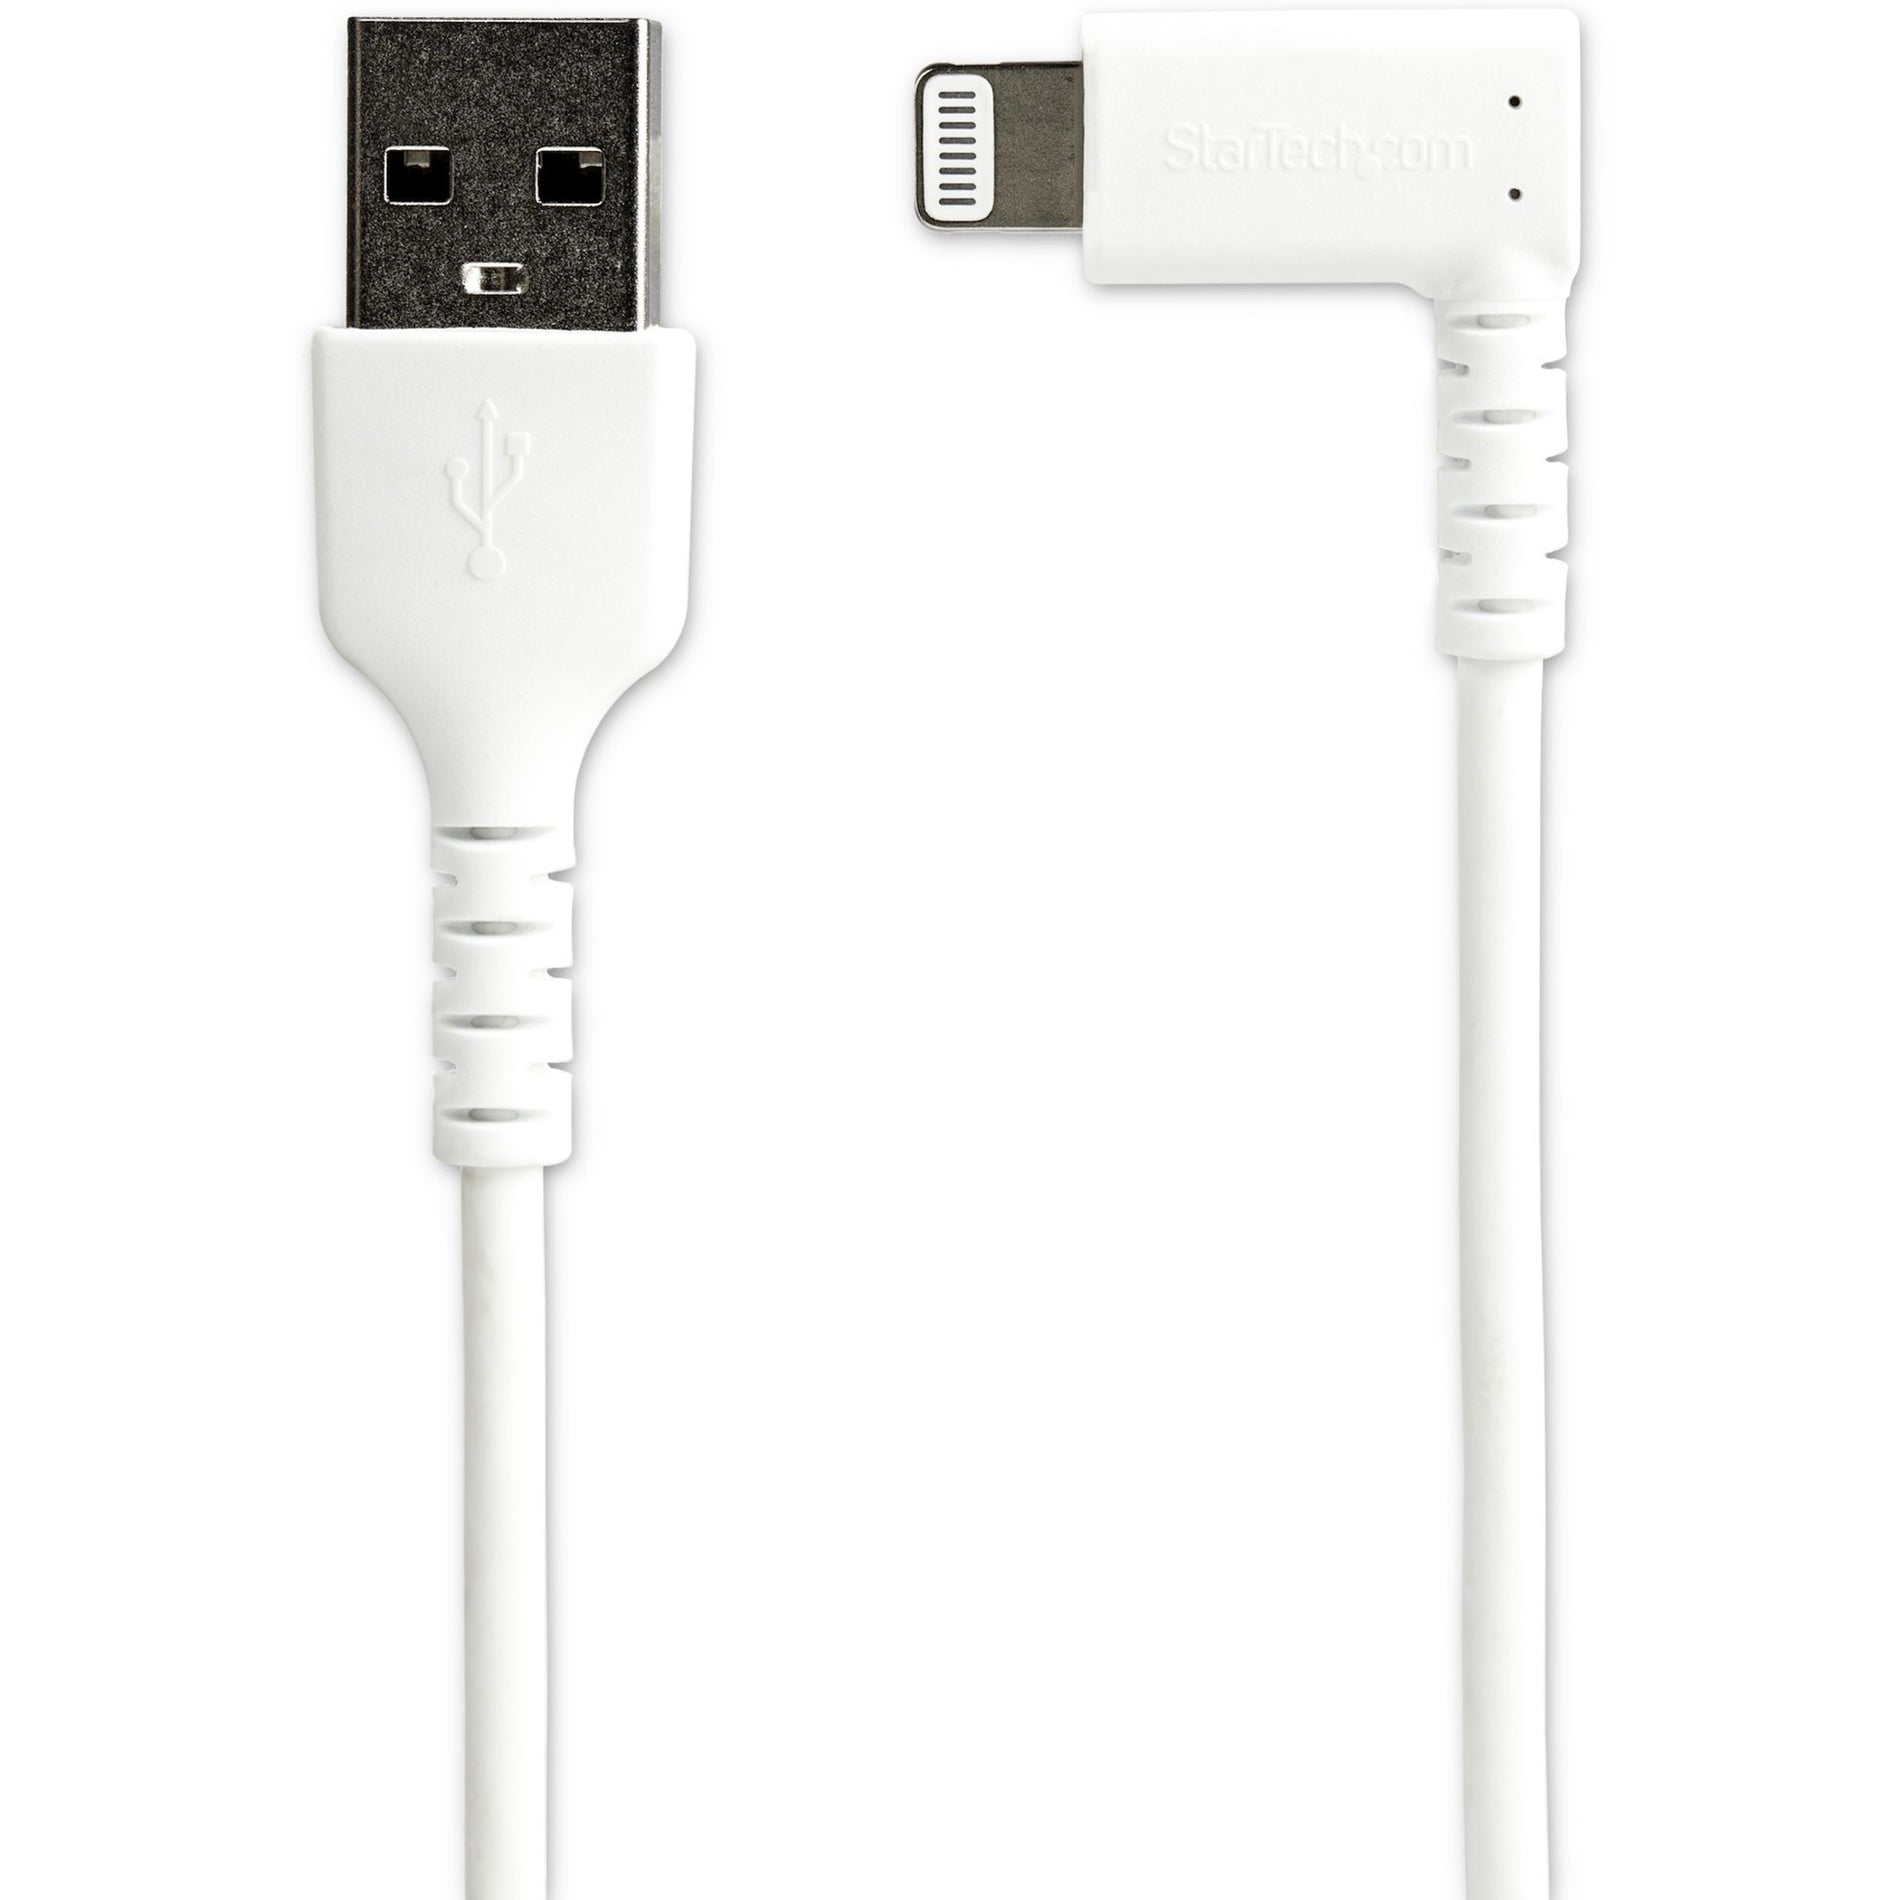 StarTech.com RUSBLTMM2MWR Lightning/USB Data Transfer Cable, 6.6Ft - Heavy Duty Mfi Certified, White, USB to Lightning